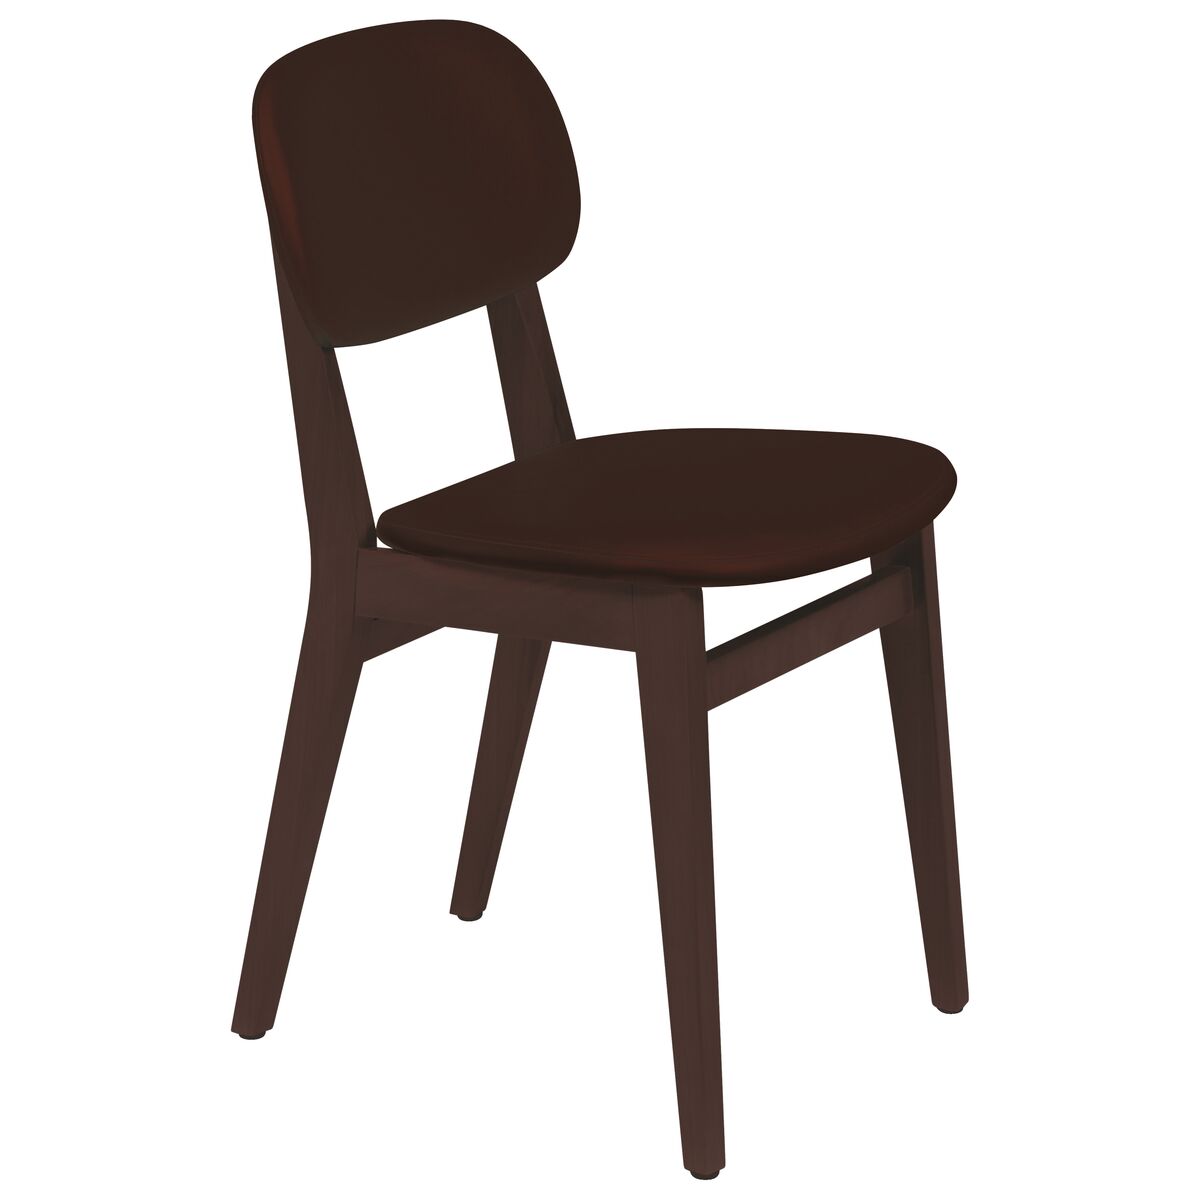 Tramontina London Armless Chair in Dark Brown-Colored Tauari Wood with Coffee Upholstery